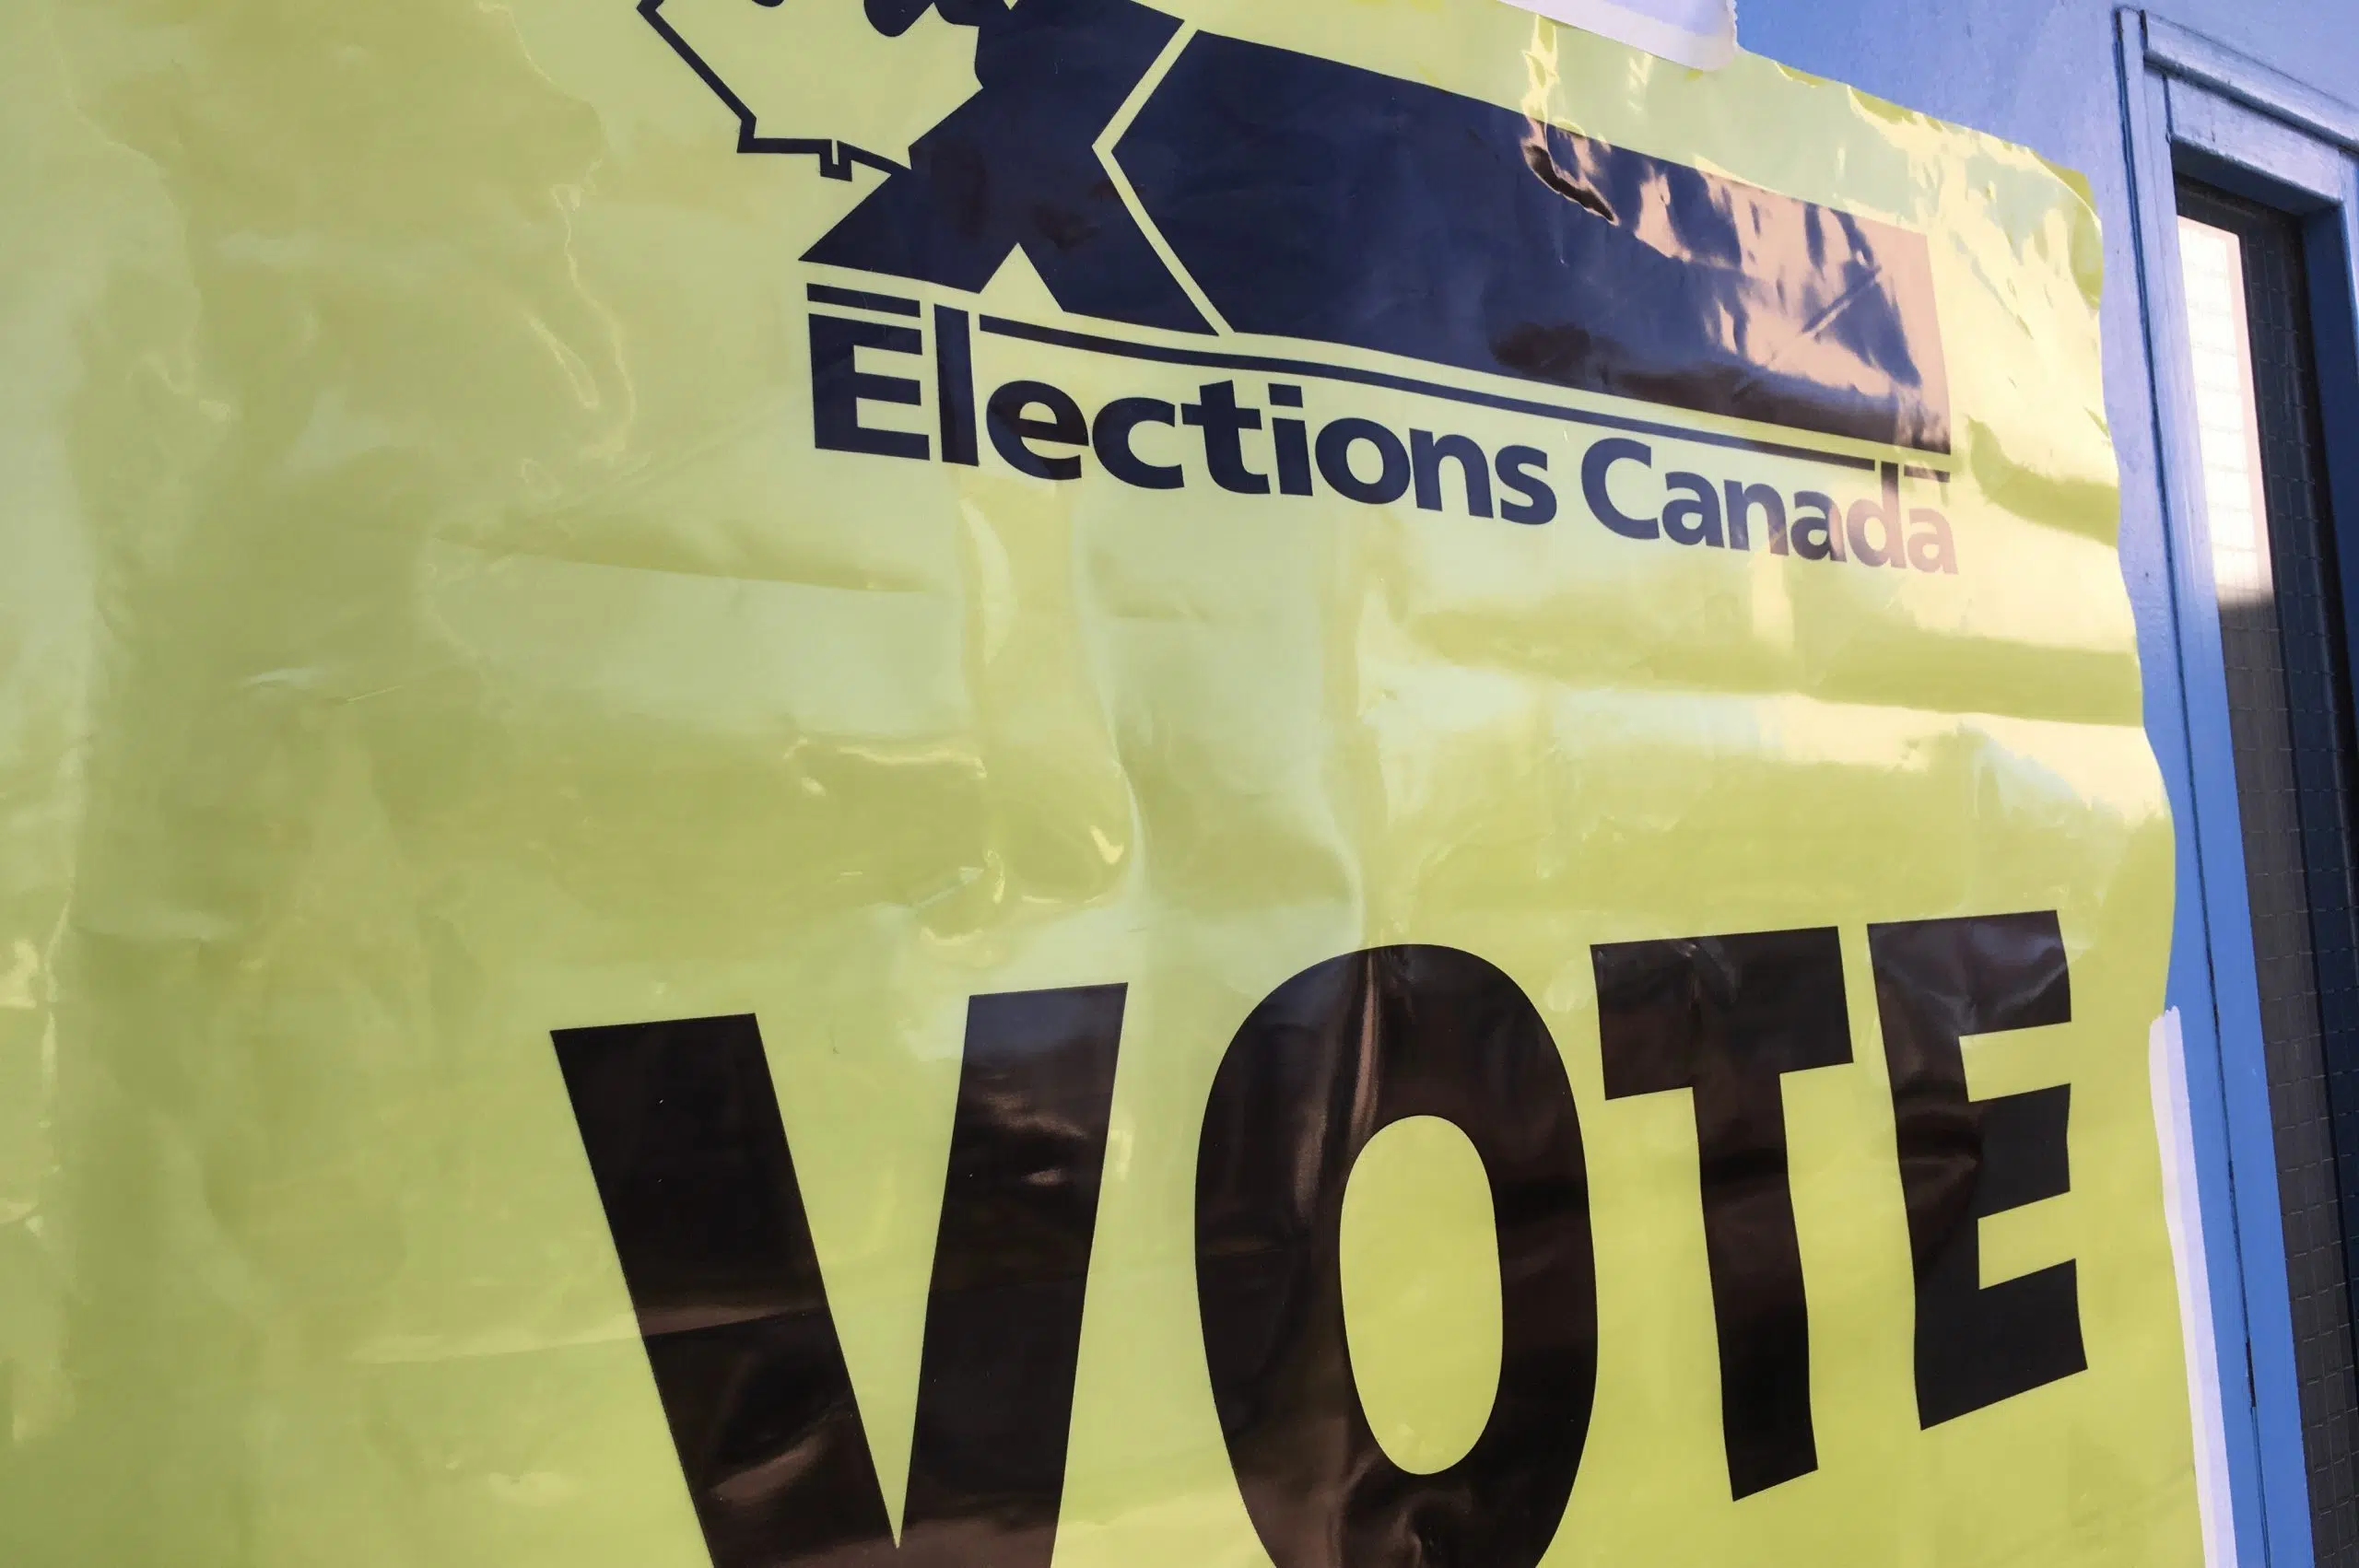 Advance polls for federal election open Friday